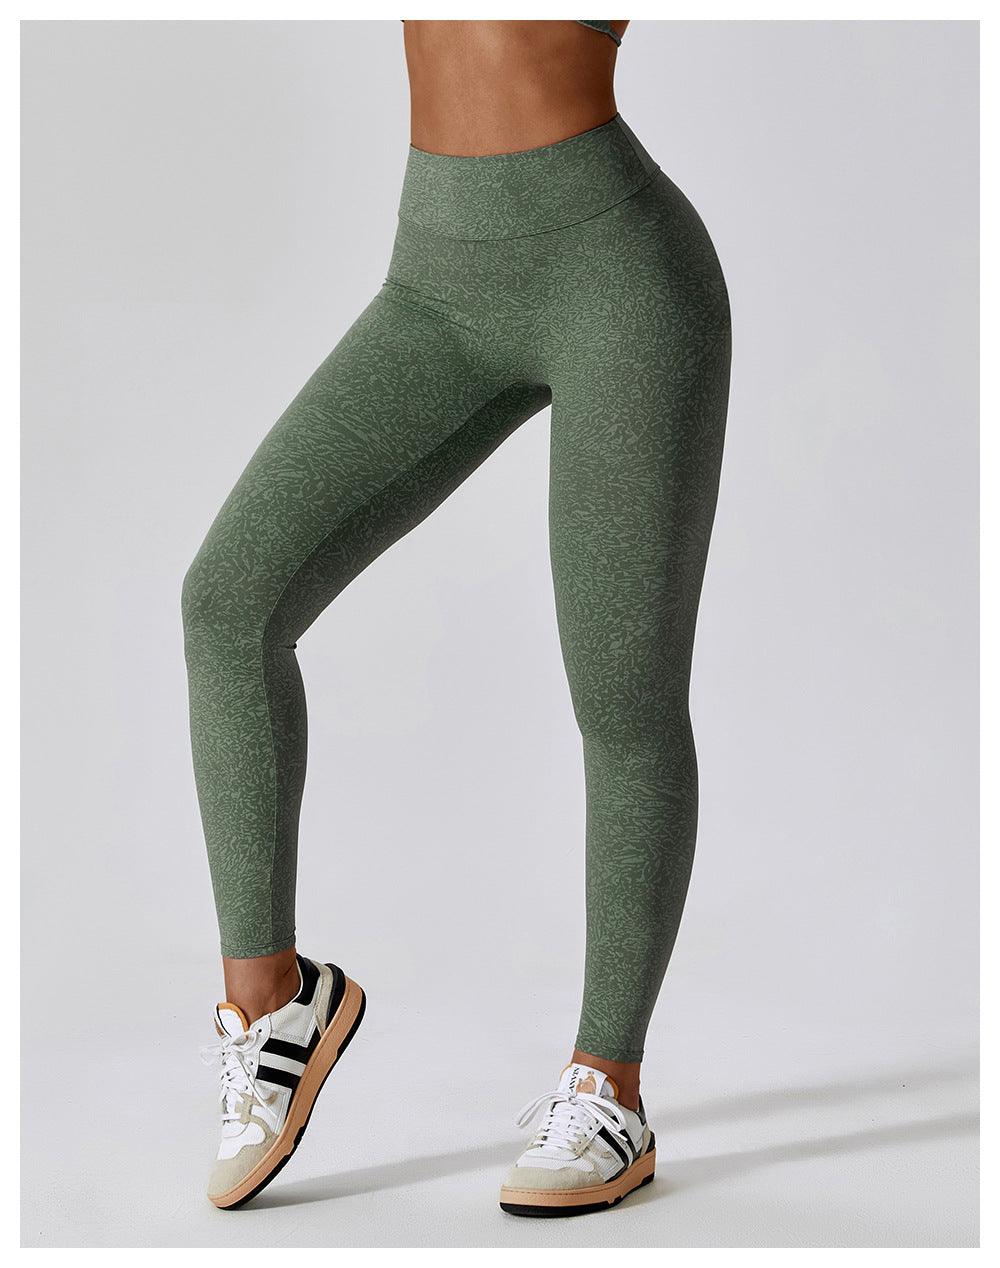 23.07 Camouflage printed high-waisted yoga pants belly-holding hip-lifting running sports quick-drying fitness pants 8256